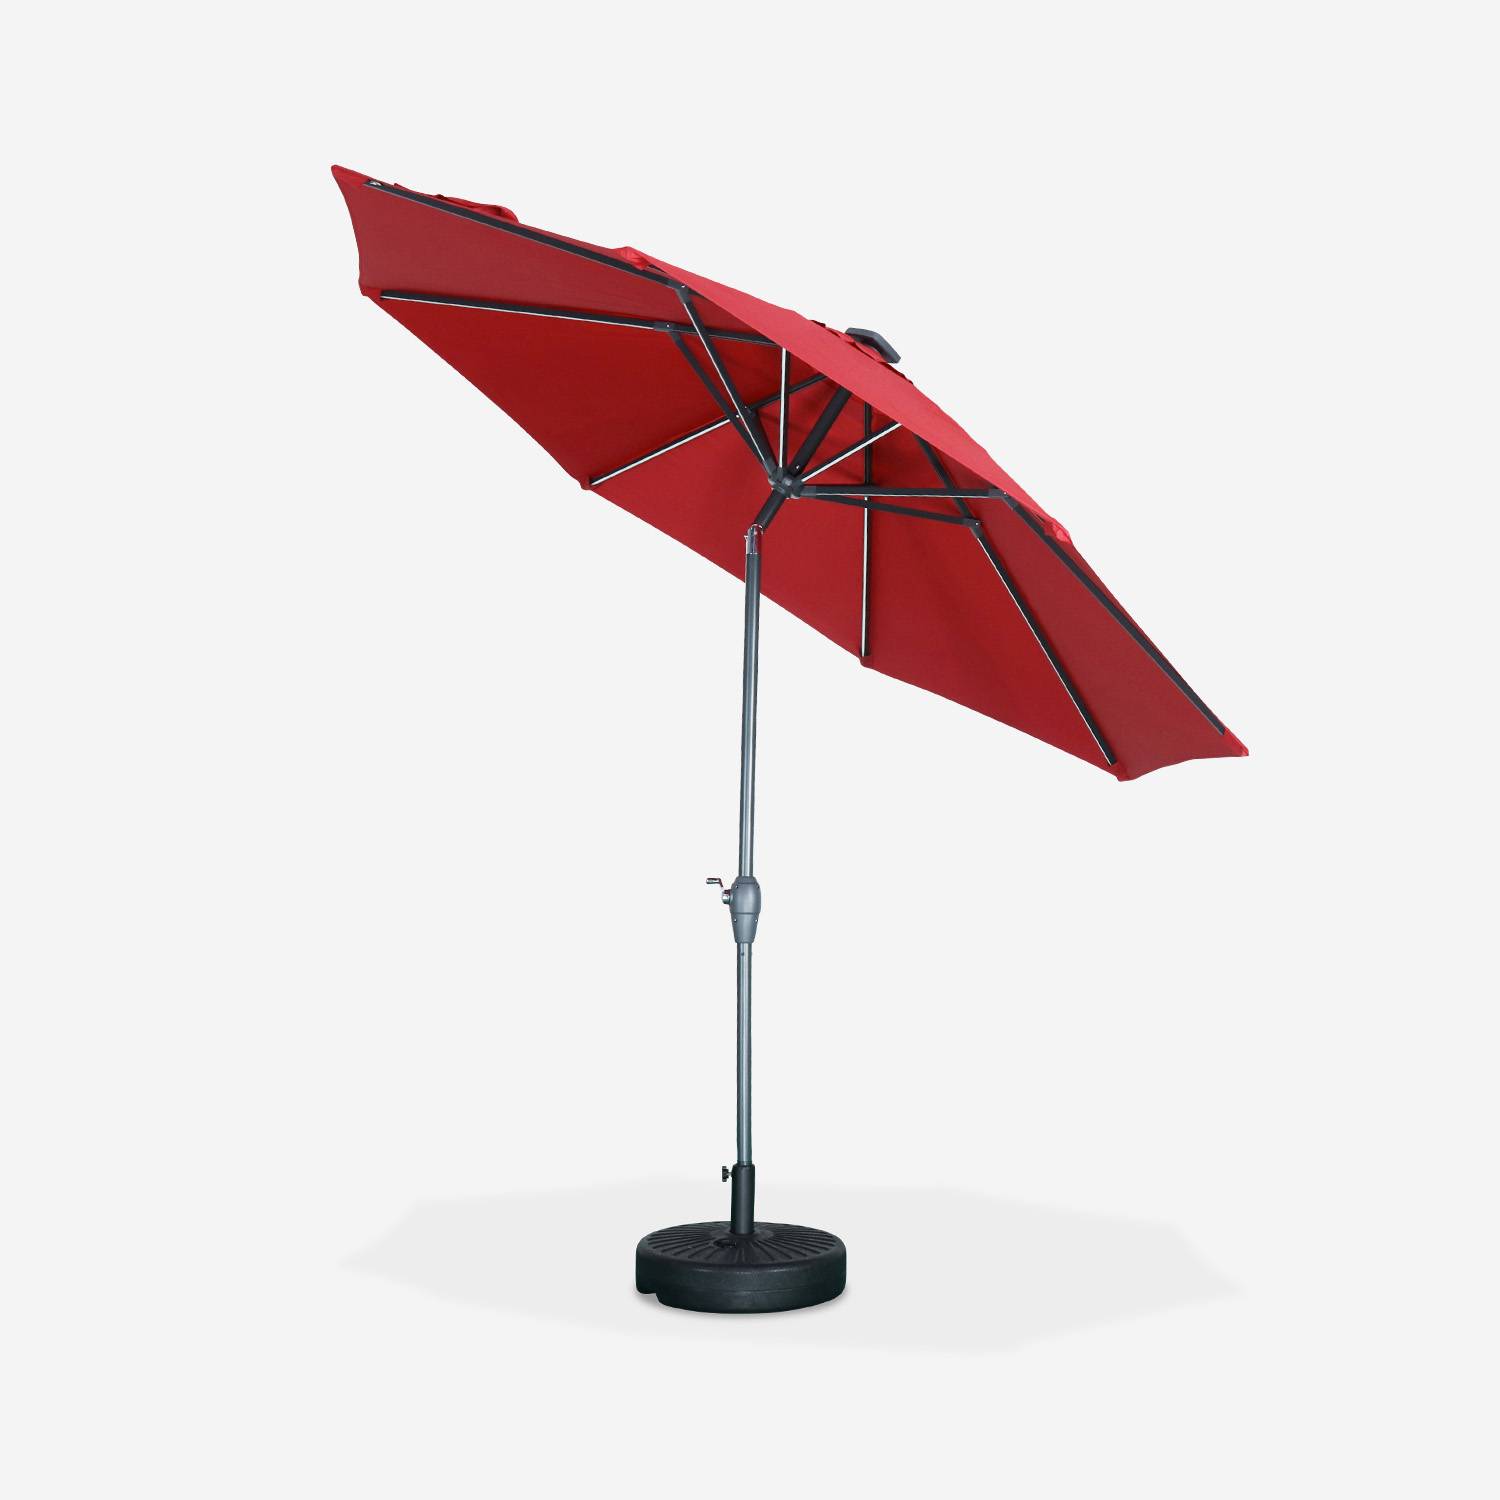 2.7m round centre pole LED parasol - adjustable aluminium central mast and crank handle opening - Helios - Red Photo2